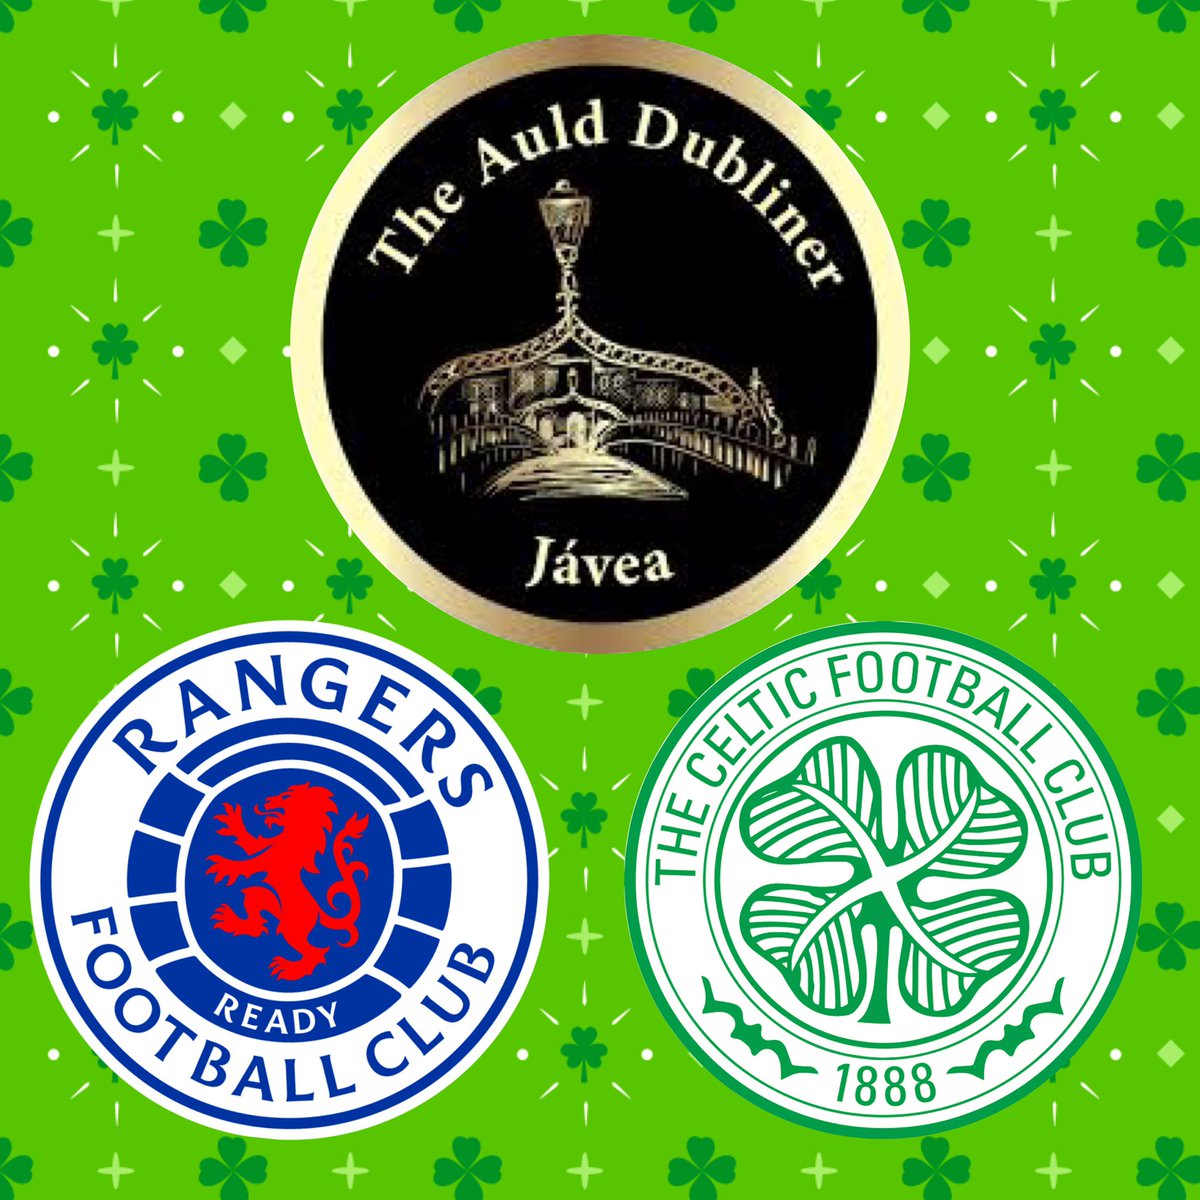 A few of us will be in the Auld Dubliner in the Arenal area of Xàbia for the Derby game today. ⚽ KO: 1pm All welcome - Hail Hail! 🇮🇪💚🏴󠁧󠁢󠁳󠁣󠁴󠁿 @celticalicante @celticbars @ValenciaPatsCSC